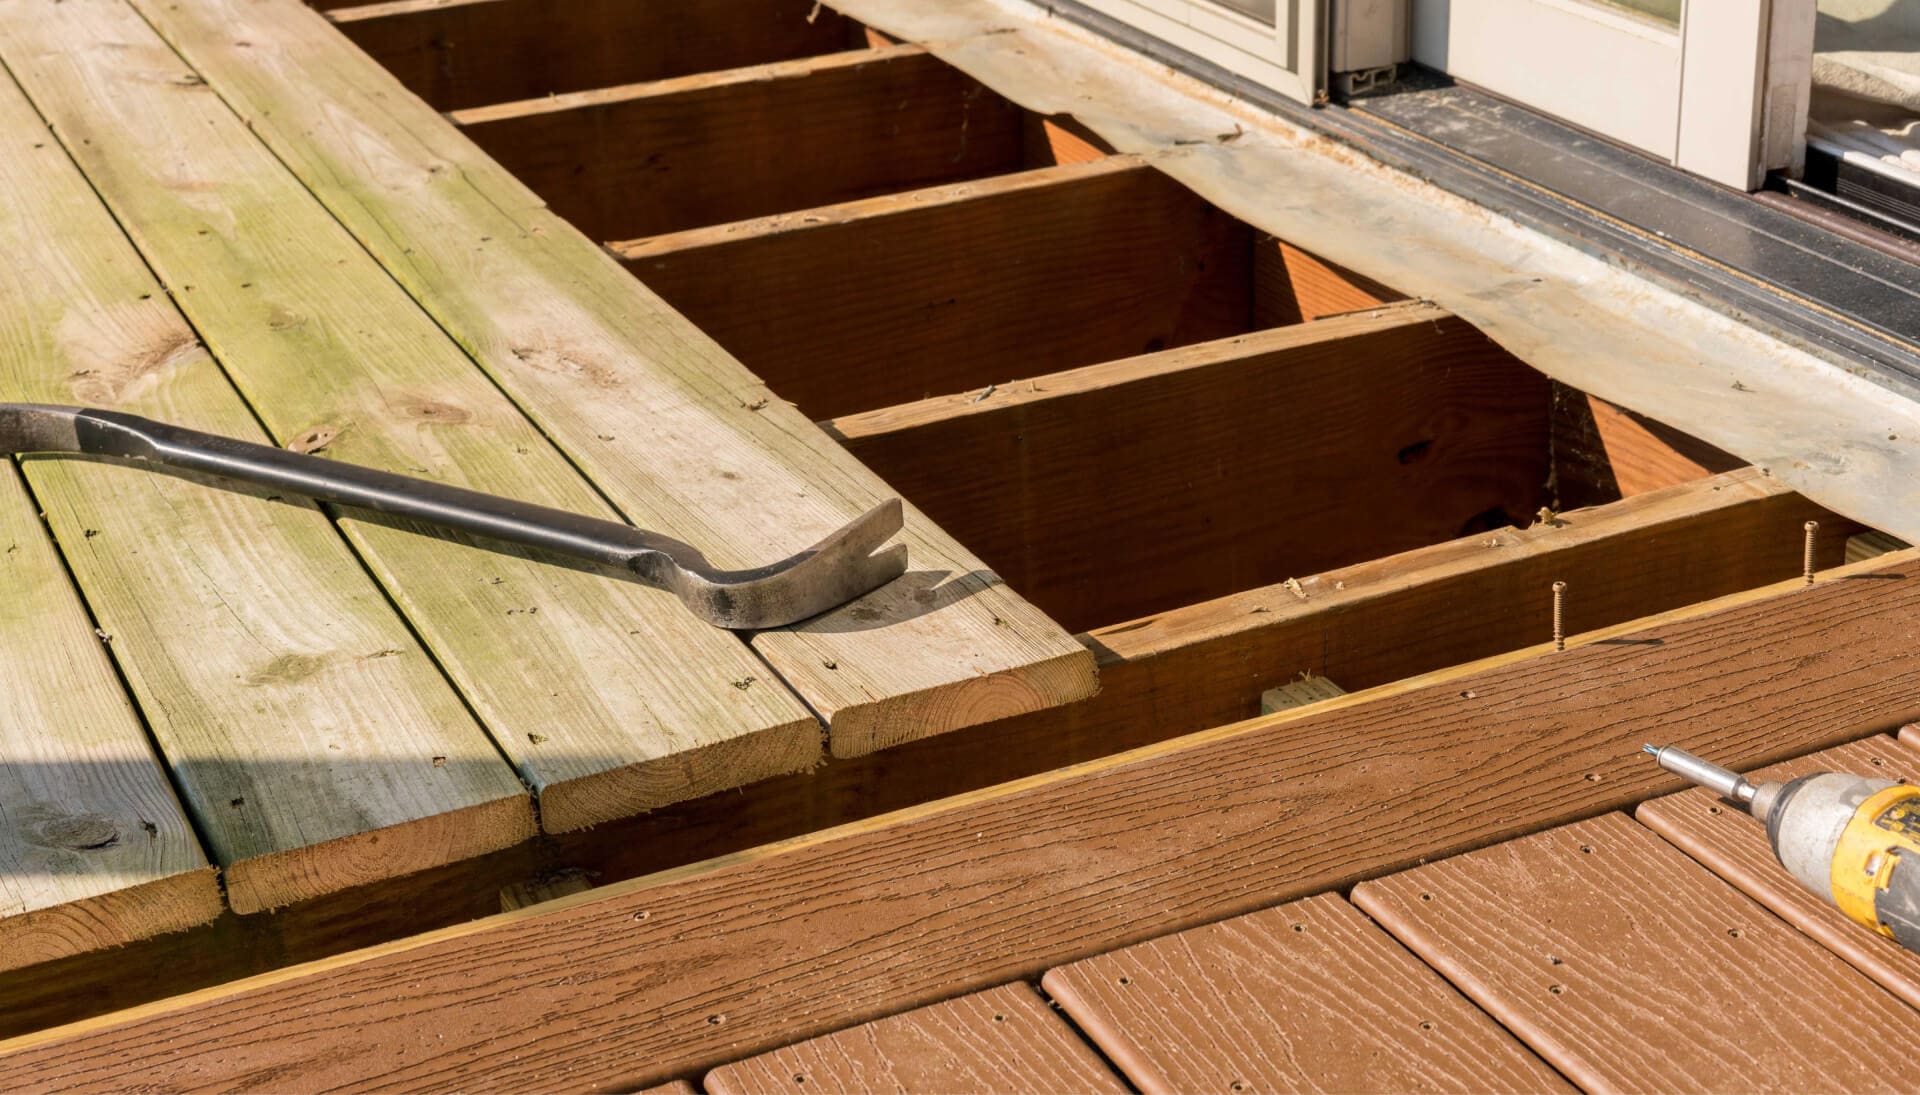 A professional deck repair service in Orlando, providing thorough inspections and maintenance to ensure the safety and durability of the structure